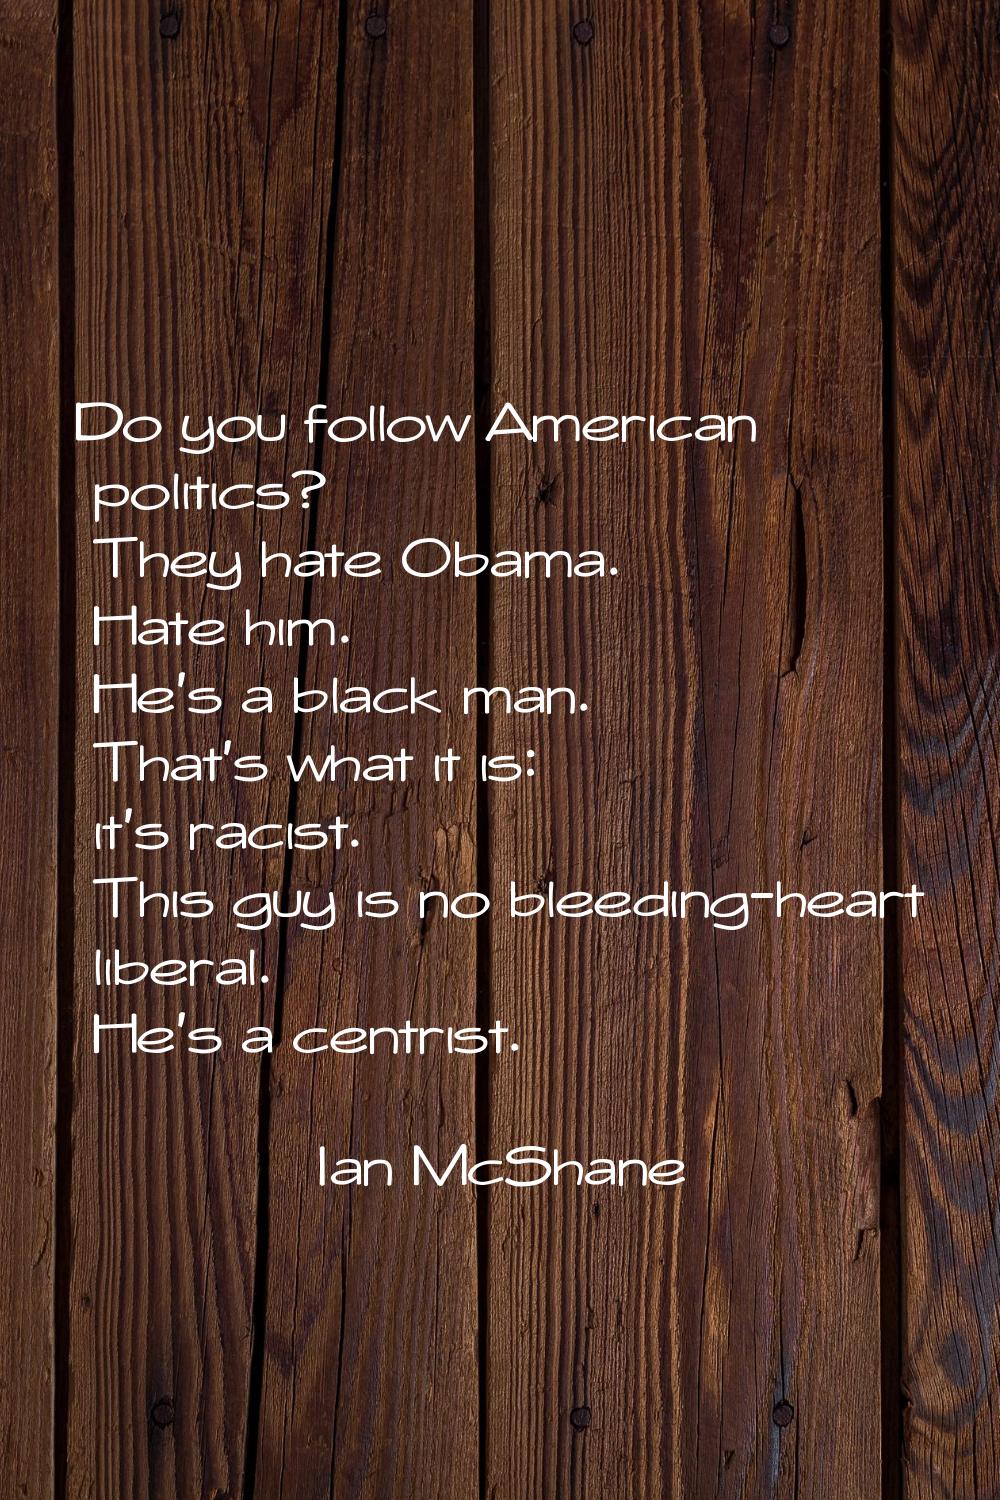 Do you follow American politics? They hate Obama. Hate him. He's a black man. That's what it is: it